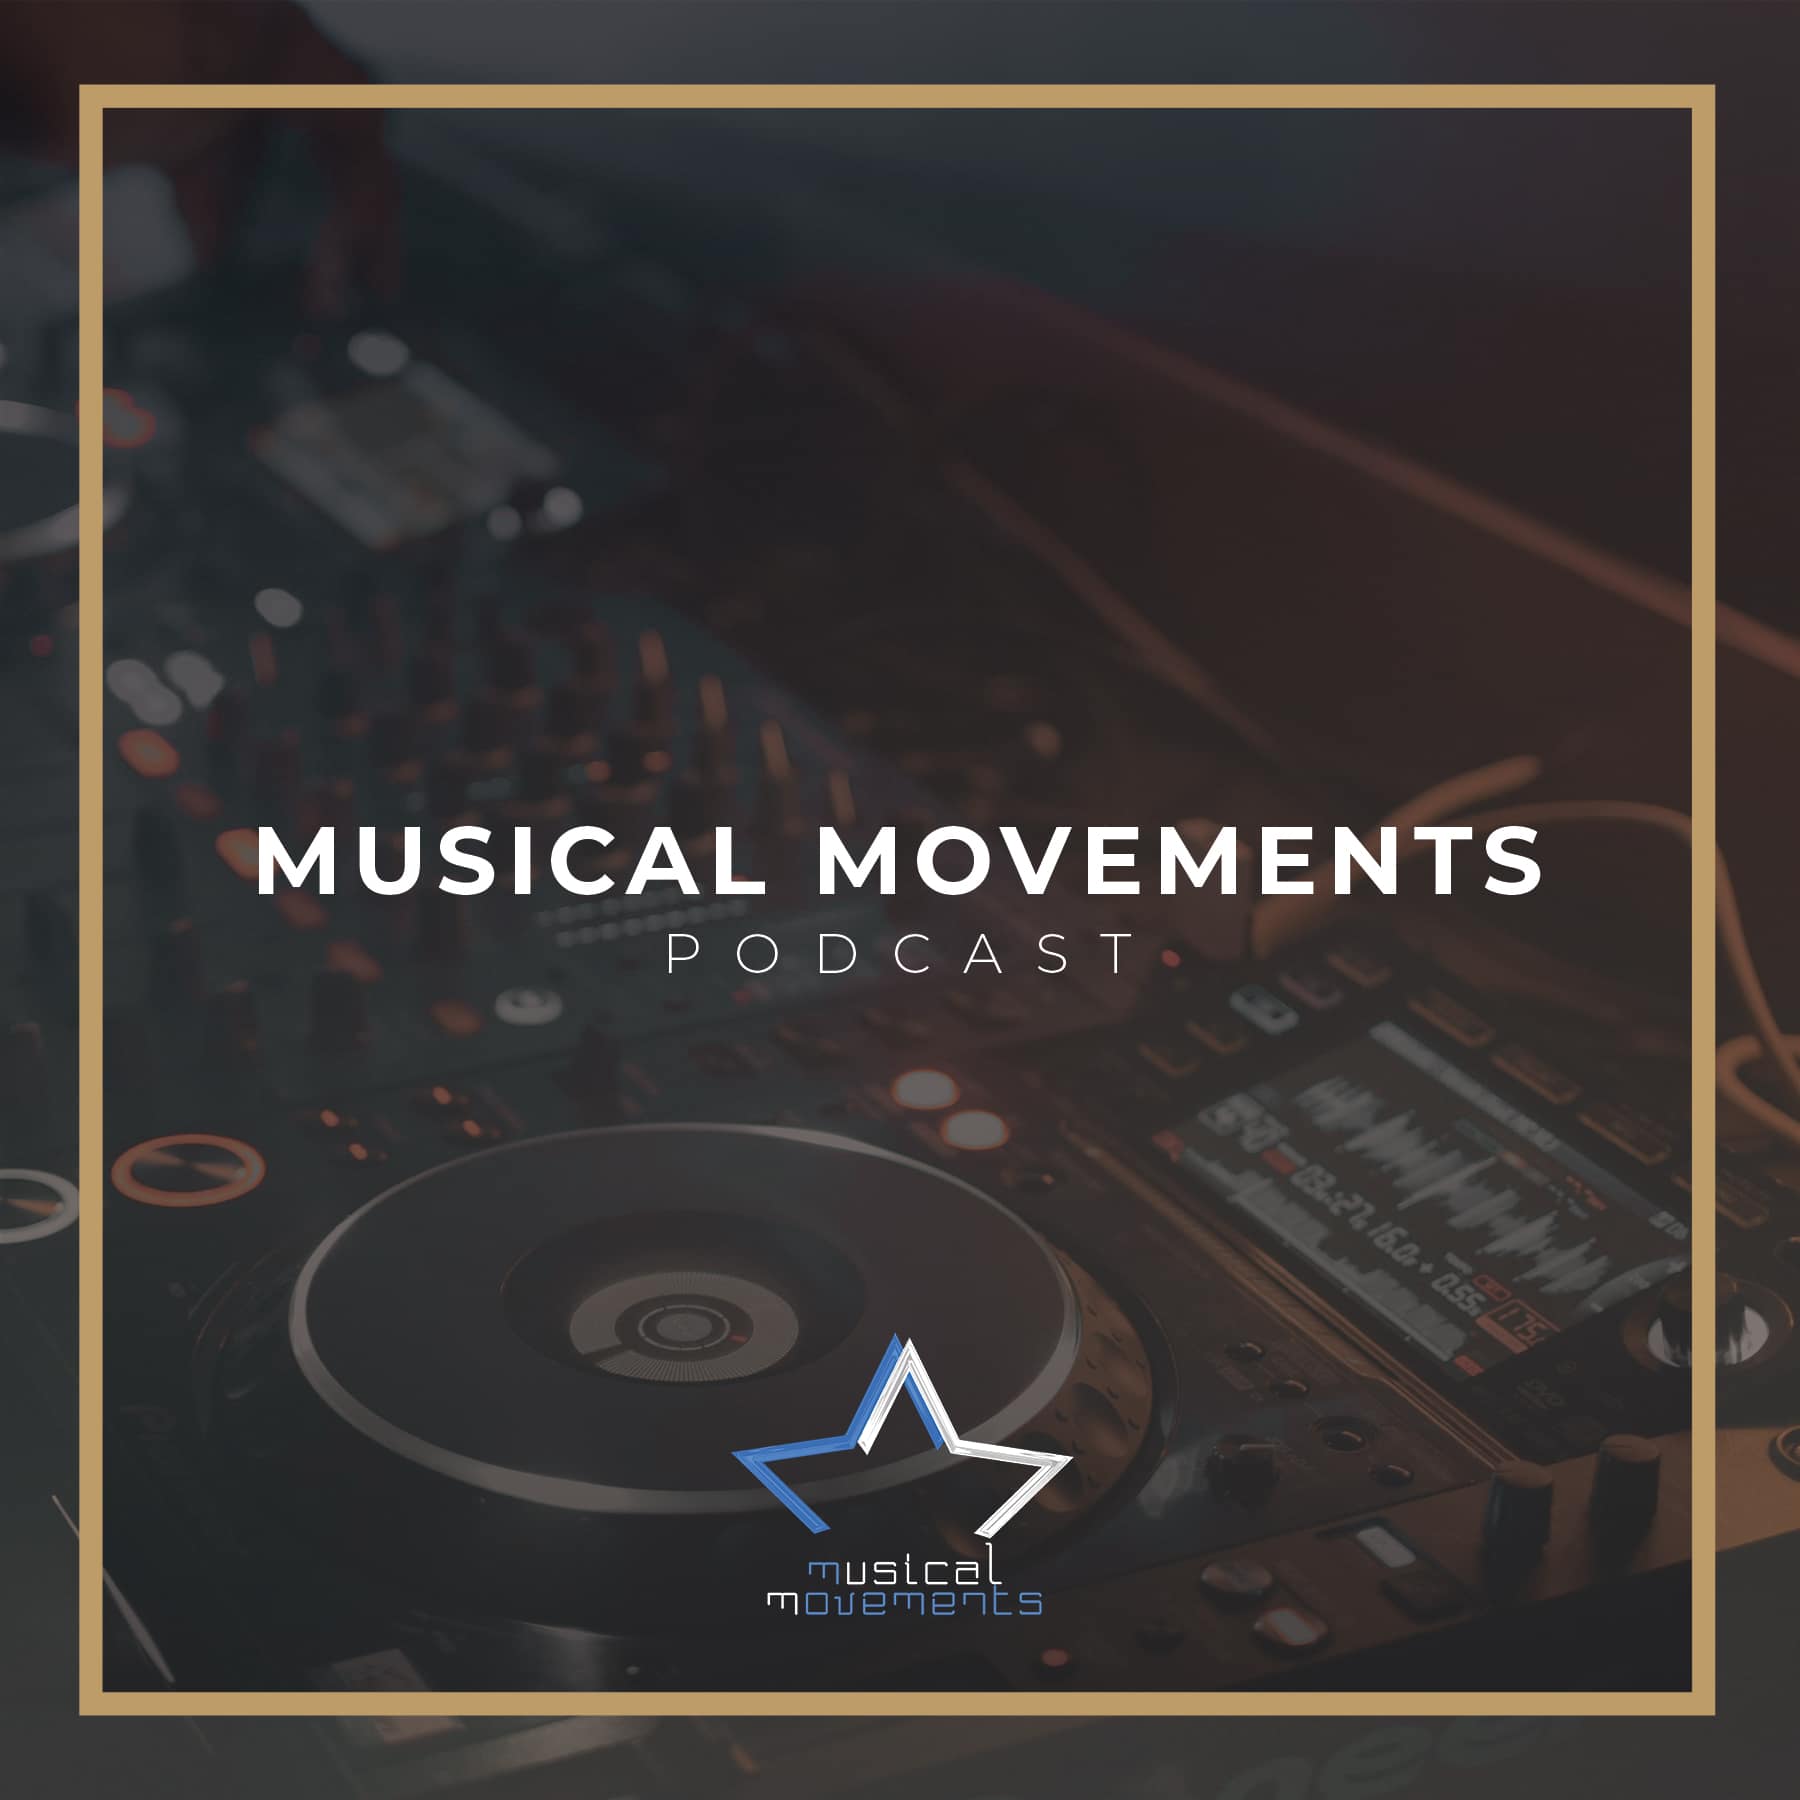 The Musical Movements Podcast